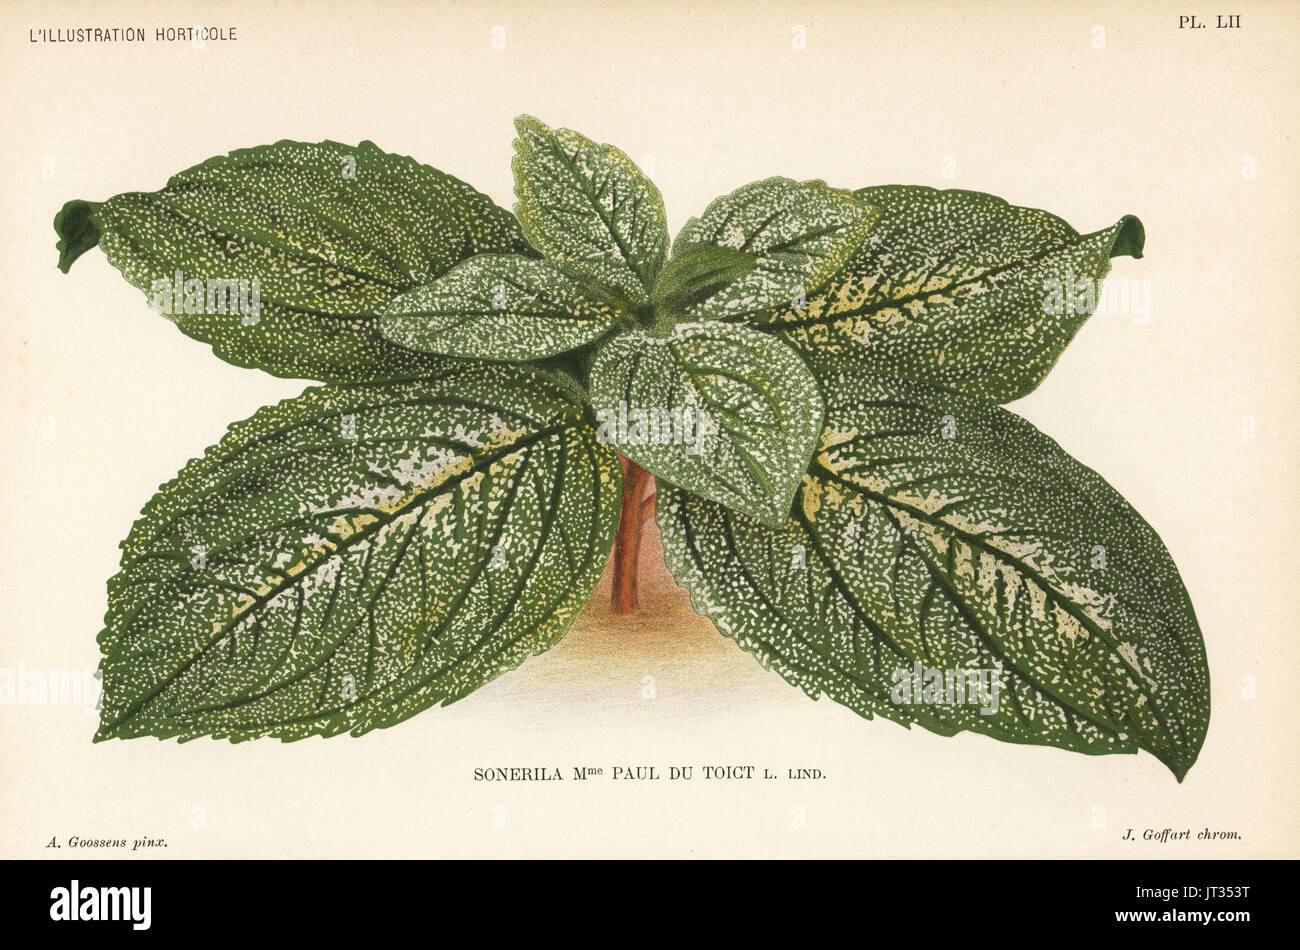 Sonerila hybrid, Madame Paul du Toict, raised by Paul du Toict, Sonerila orientalis x Sonerila margaritacea. Chromolithograph by J. Goffart after an illustration by A. Goossens from Jean Linden's l'Illustration Horticole, Brussels, 1896. Stock Photo